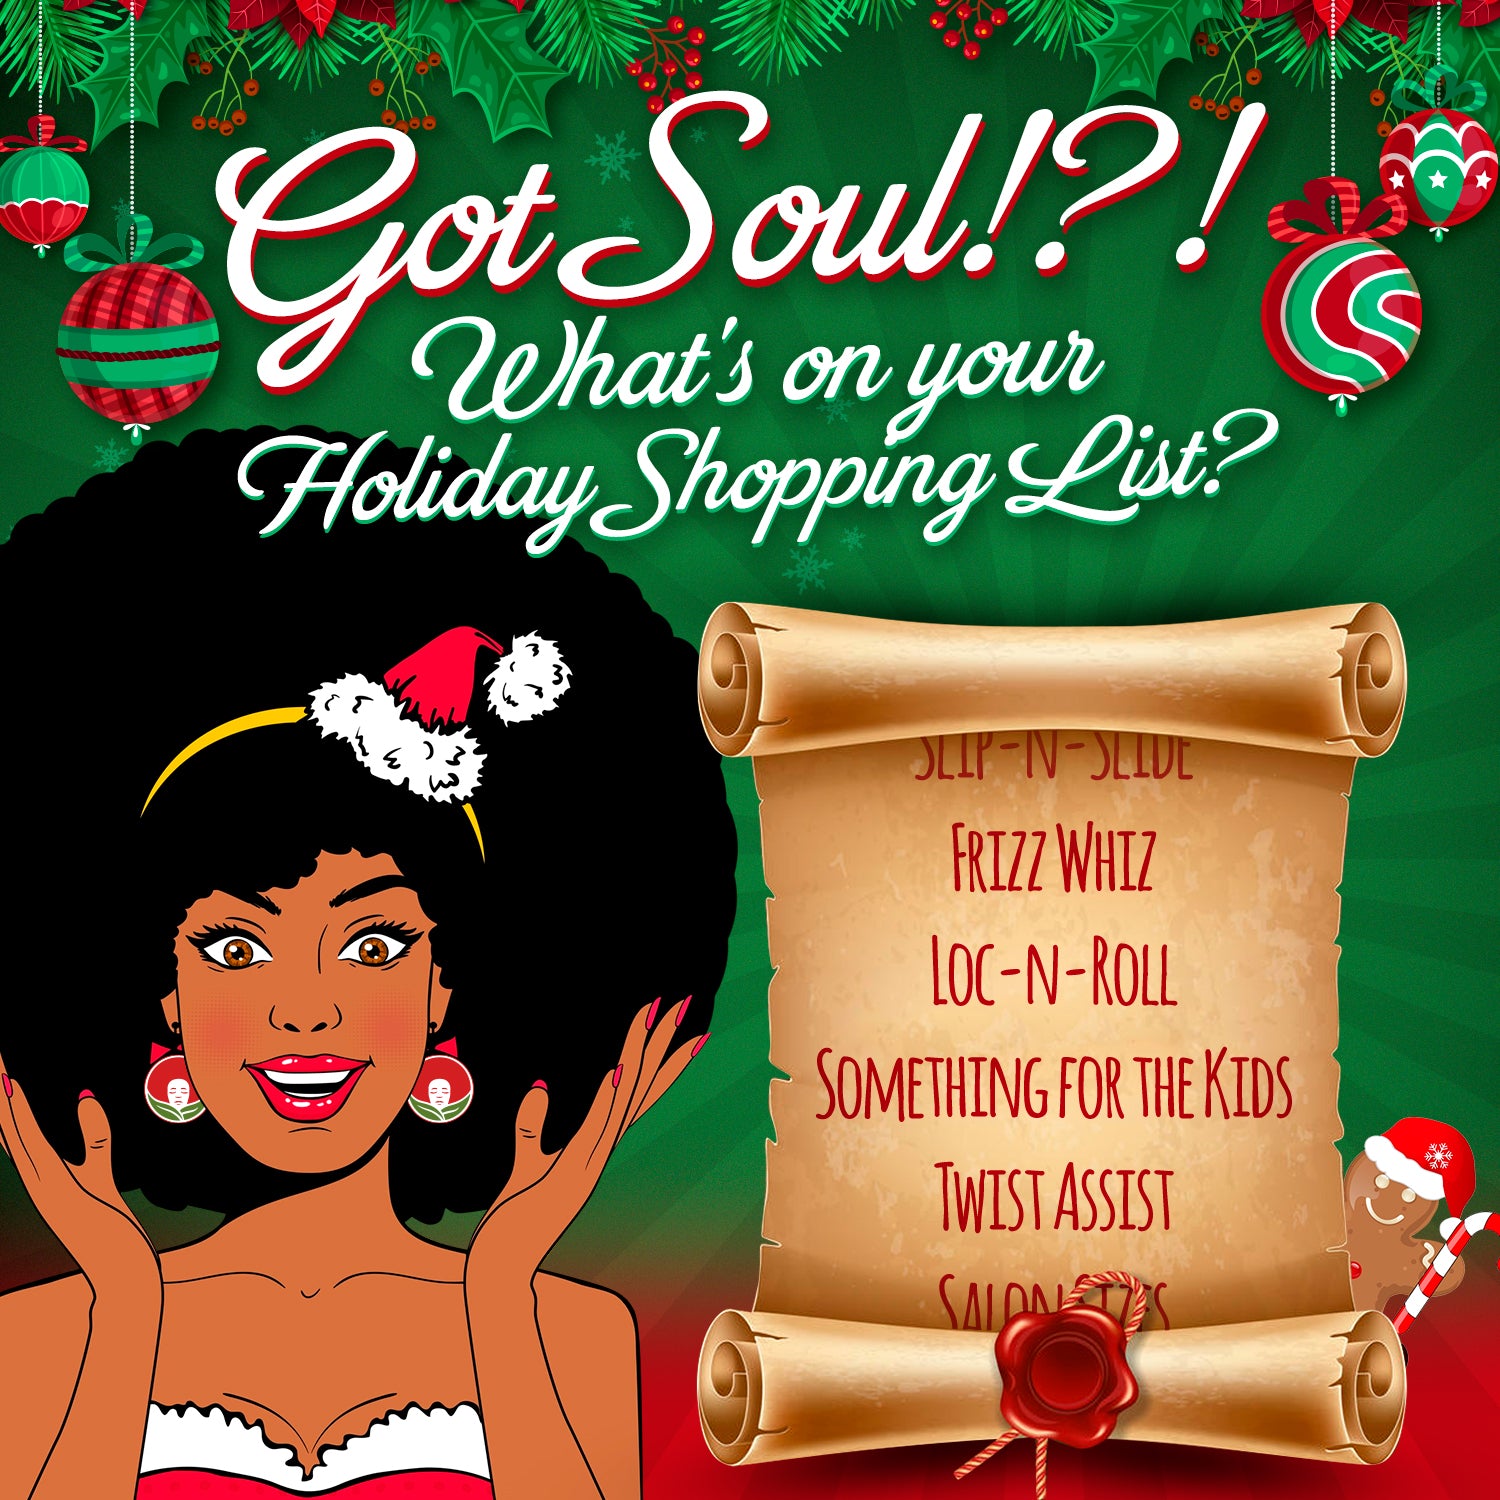 What's on your Holiday Shopping Lists?